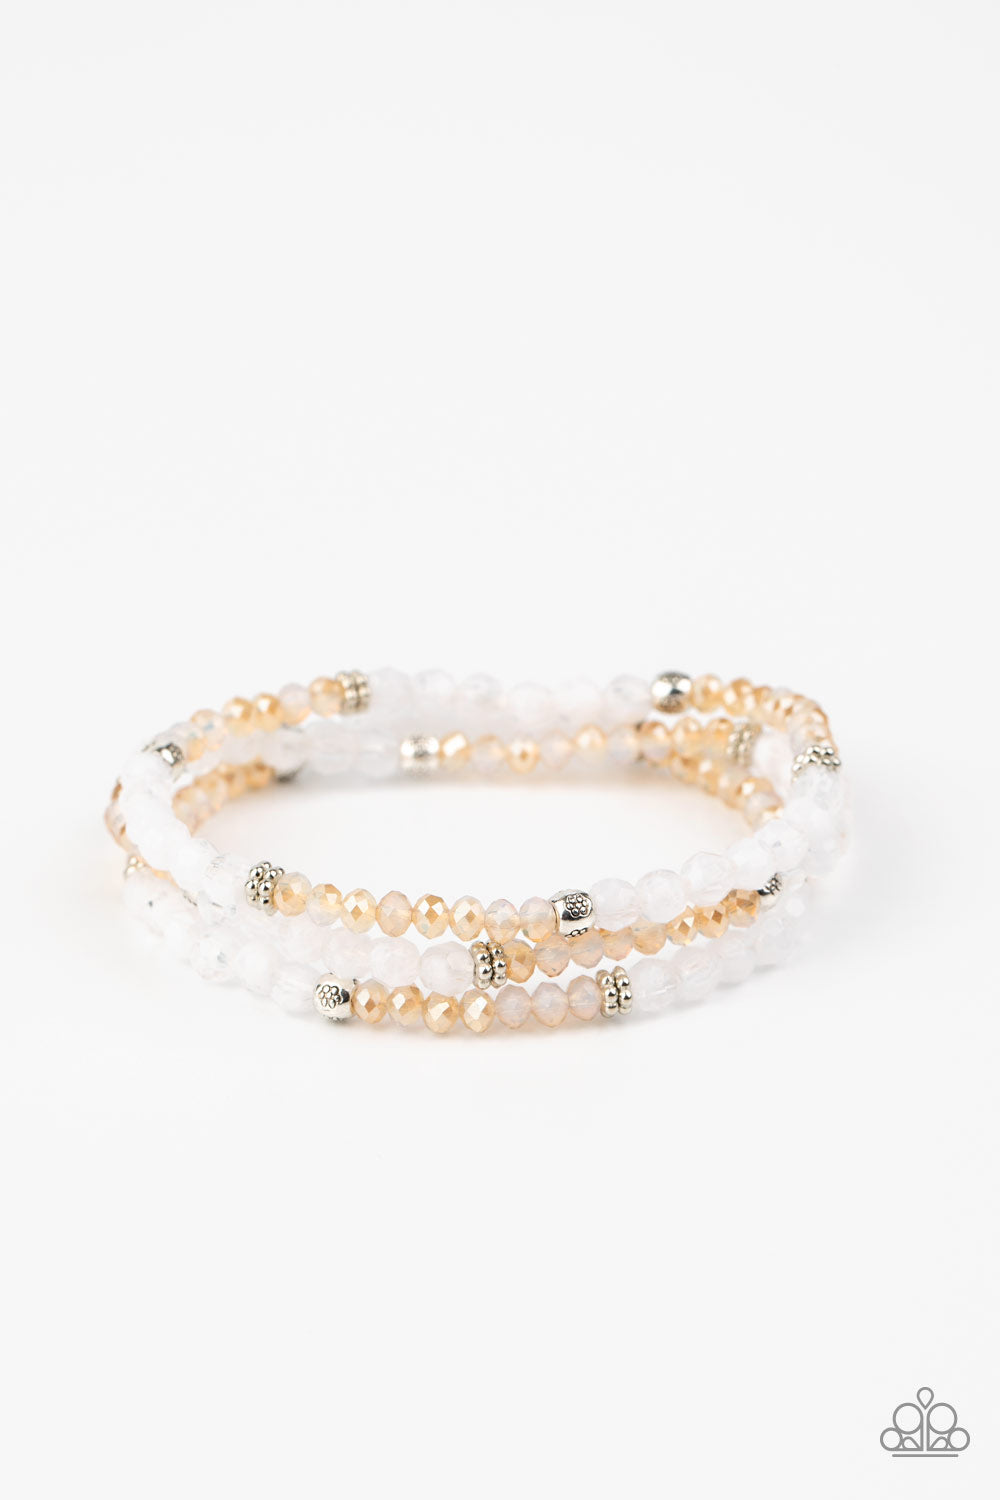 &lt;P&gt; A dainty collection of icy white and iridescent crystal-like beads join mismatched silver accents along stretchy bands around the wrist, creating whimsical layers.
&lt;/P&gt;

&lt;P&gt;&lt;I&gt; Sold as one set of three bracelets.&lt;/I&gt;&lt;/p&gt;


&lt;img src=\&quot;https://d9b54x484lq62.cloudfront.net/paparazzi/shopping/images/517_tag150x115_1.png\&quot; alt=\&quot;New Kit\&quot; align=\&quot;middle\&quot; height=\&quot;50\&quot; width=\&quot;50\&quot;/&gt;